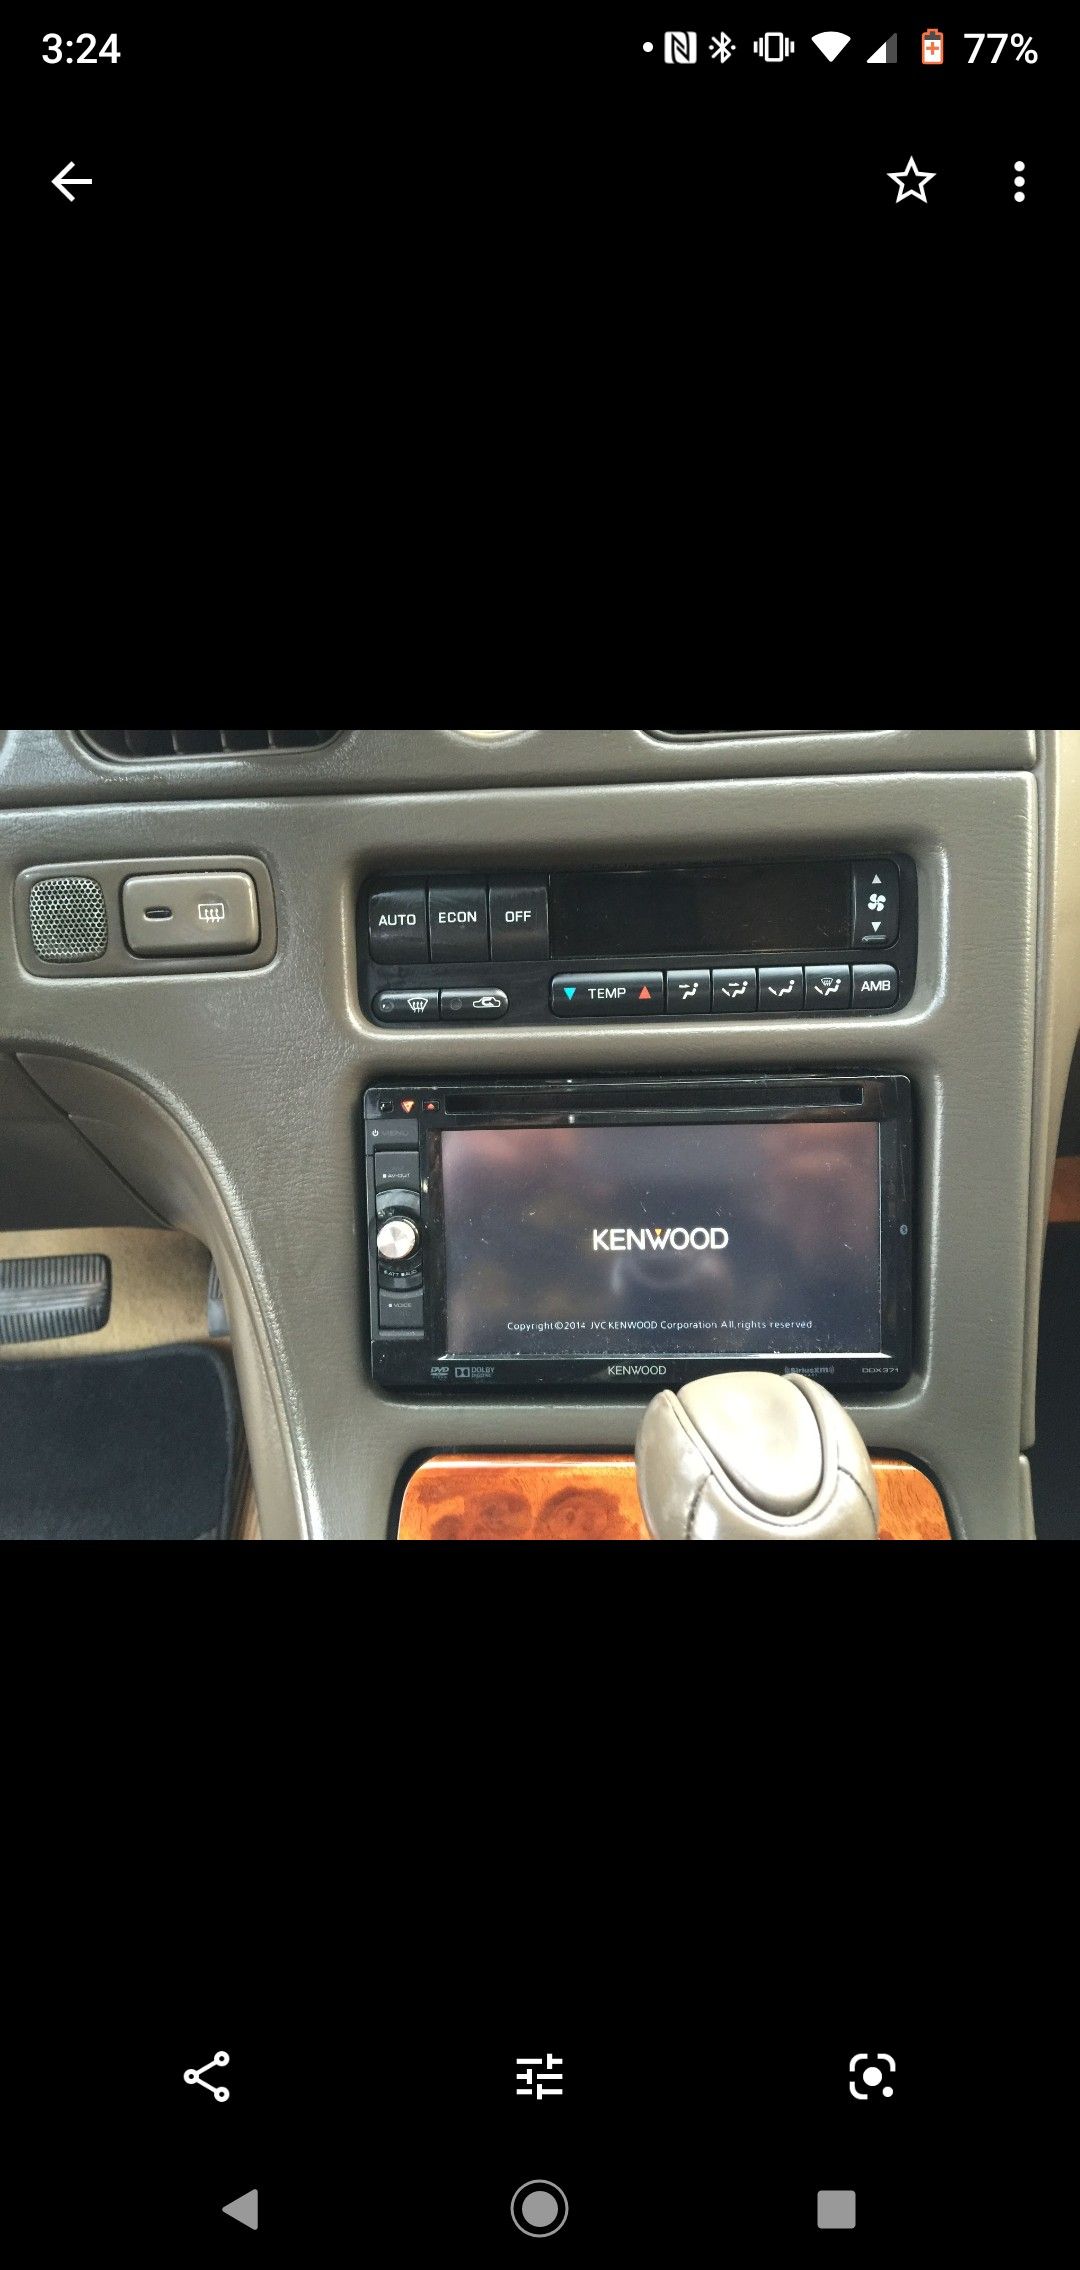 Kenwood touch screen stereo